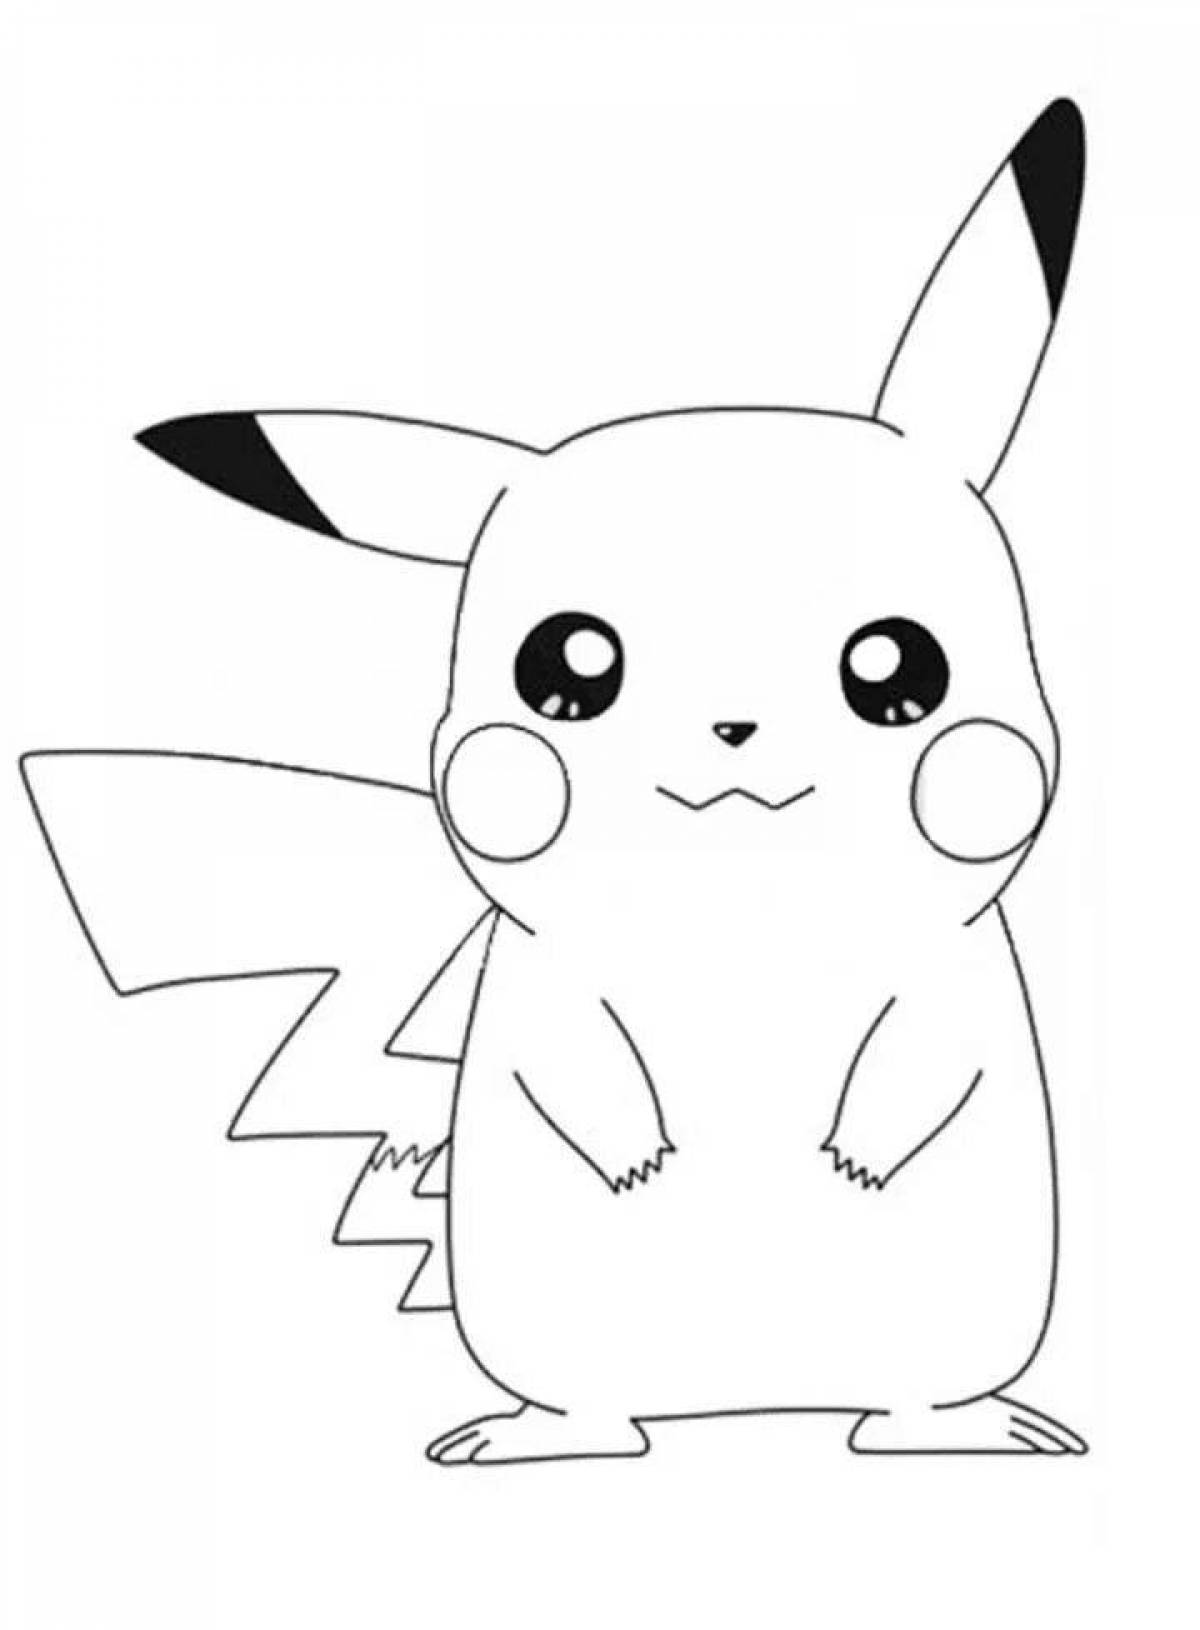 Animated pikachu coloring page